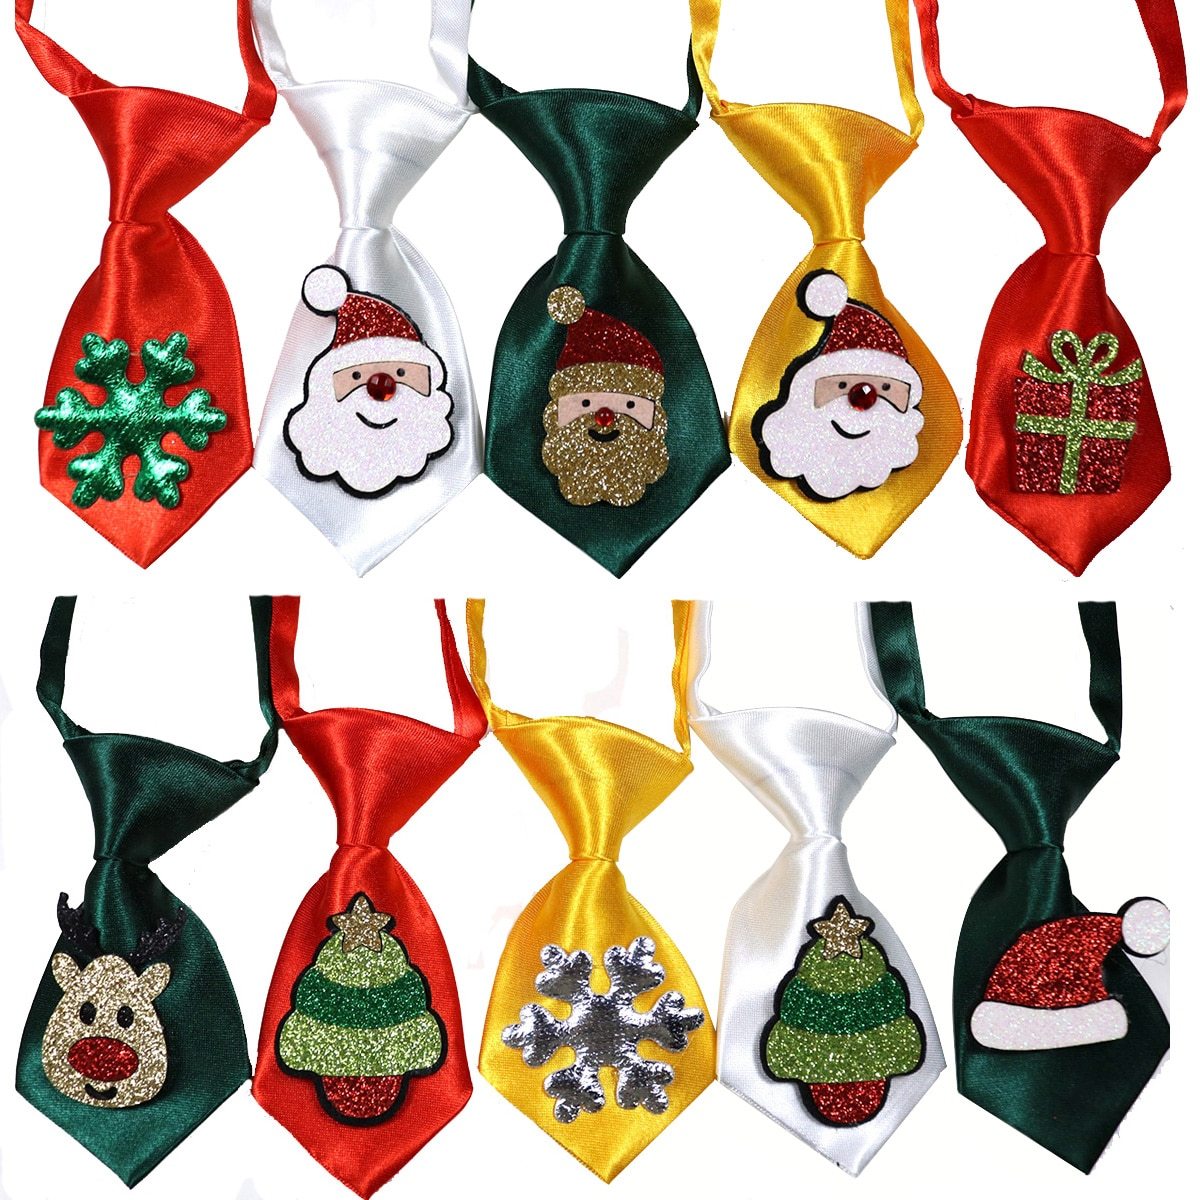 10 Adjustable Christmas Neck Ties For Puppies (soft and colorful)